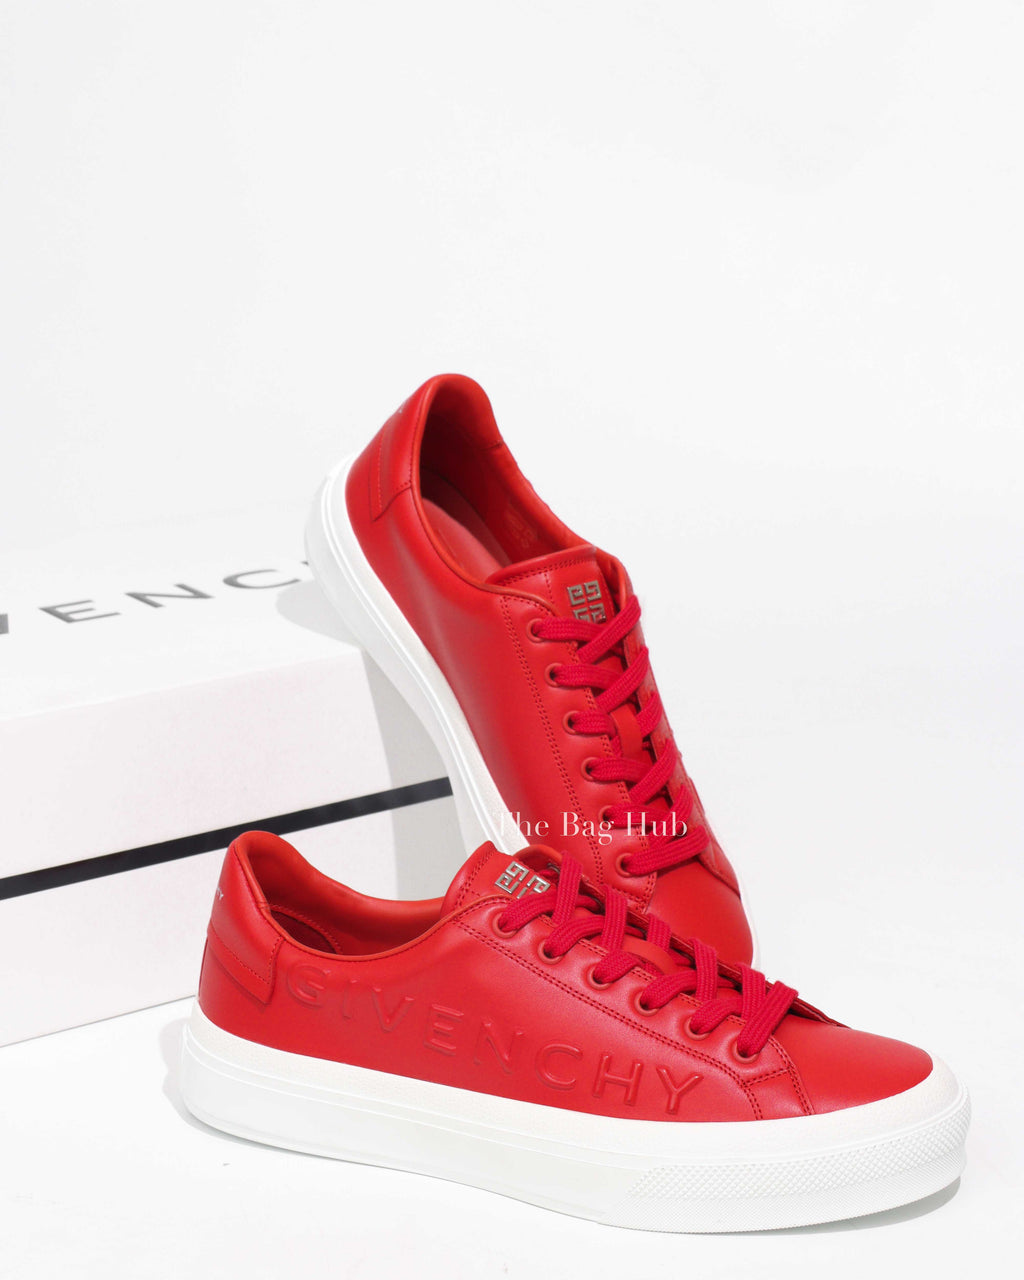 Givenchy Red City Sport Sneakers Size 41-1